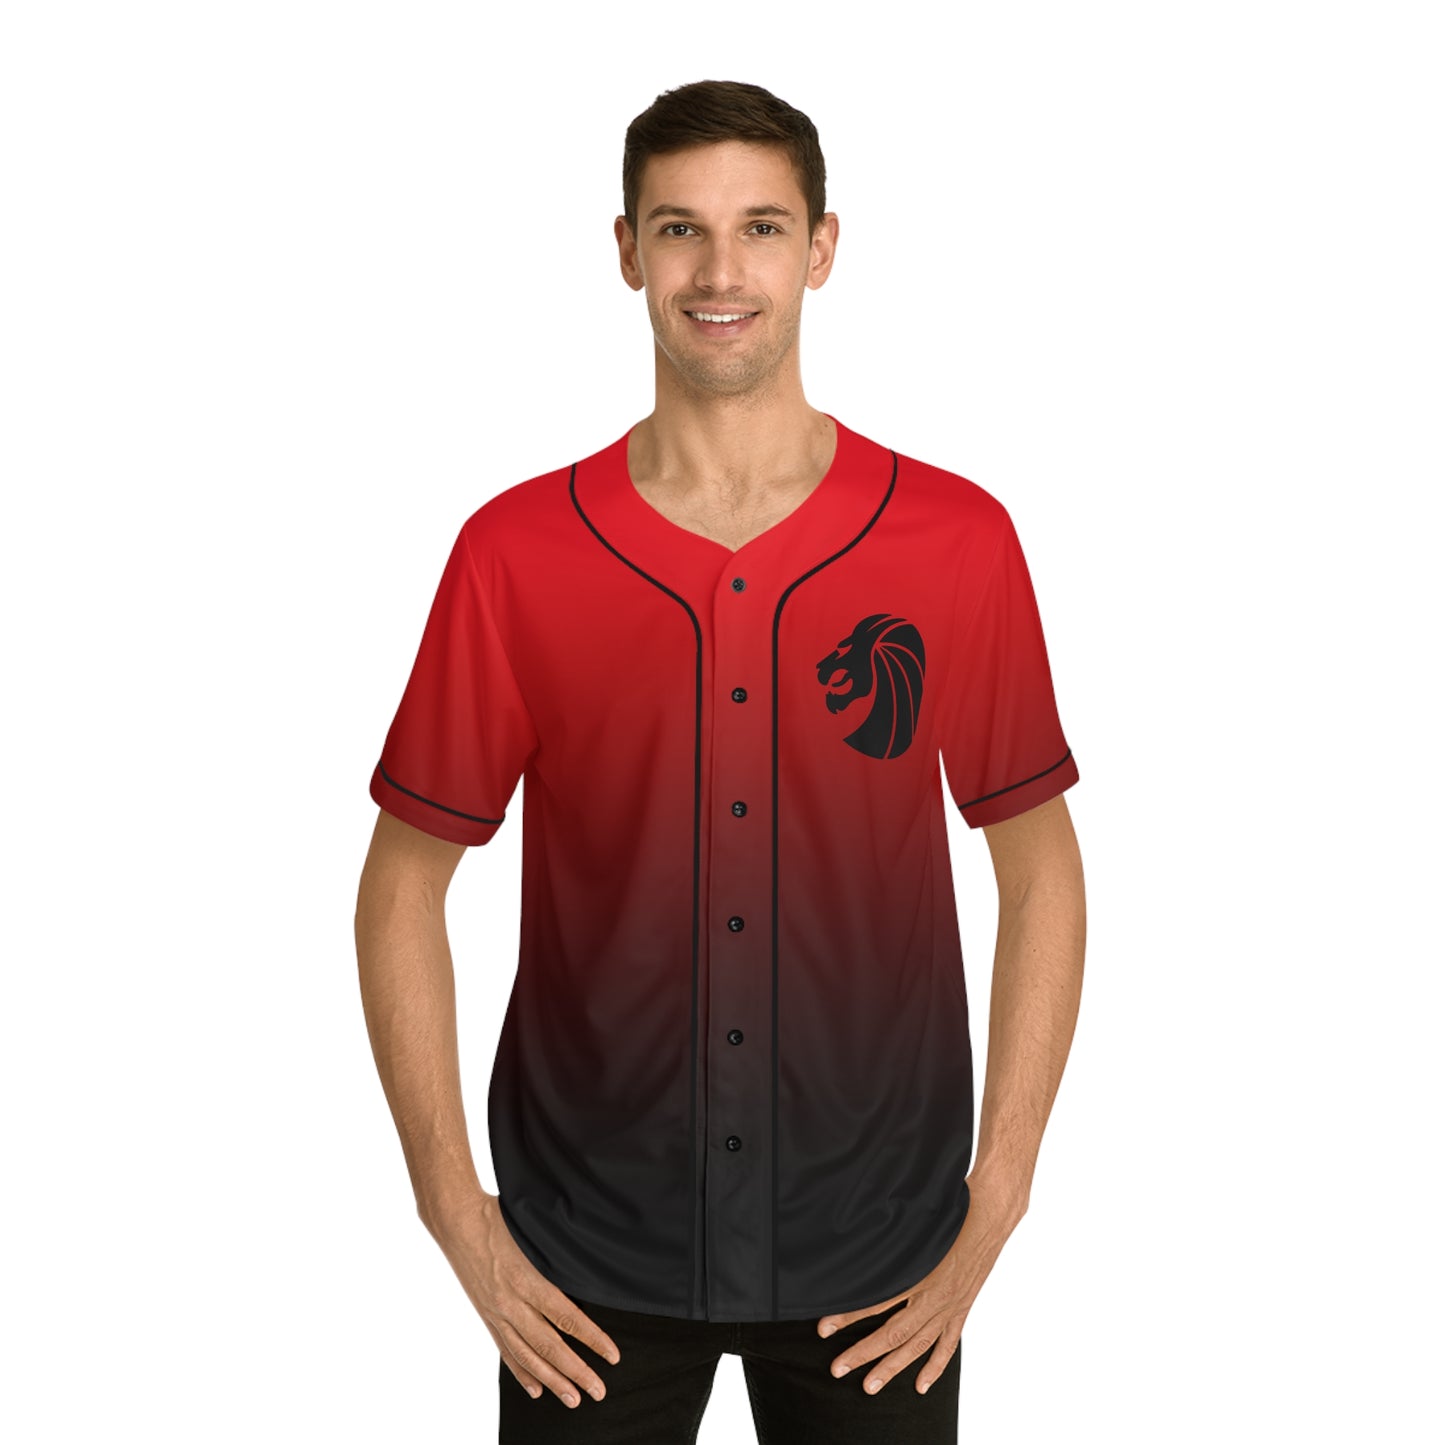 Seven Lions Jersey (Red/Black)